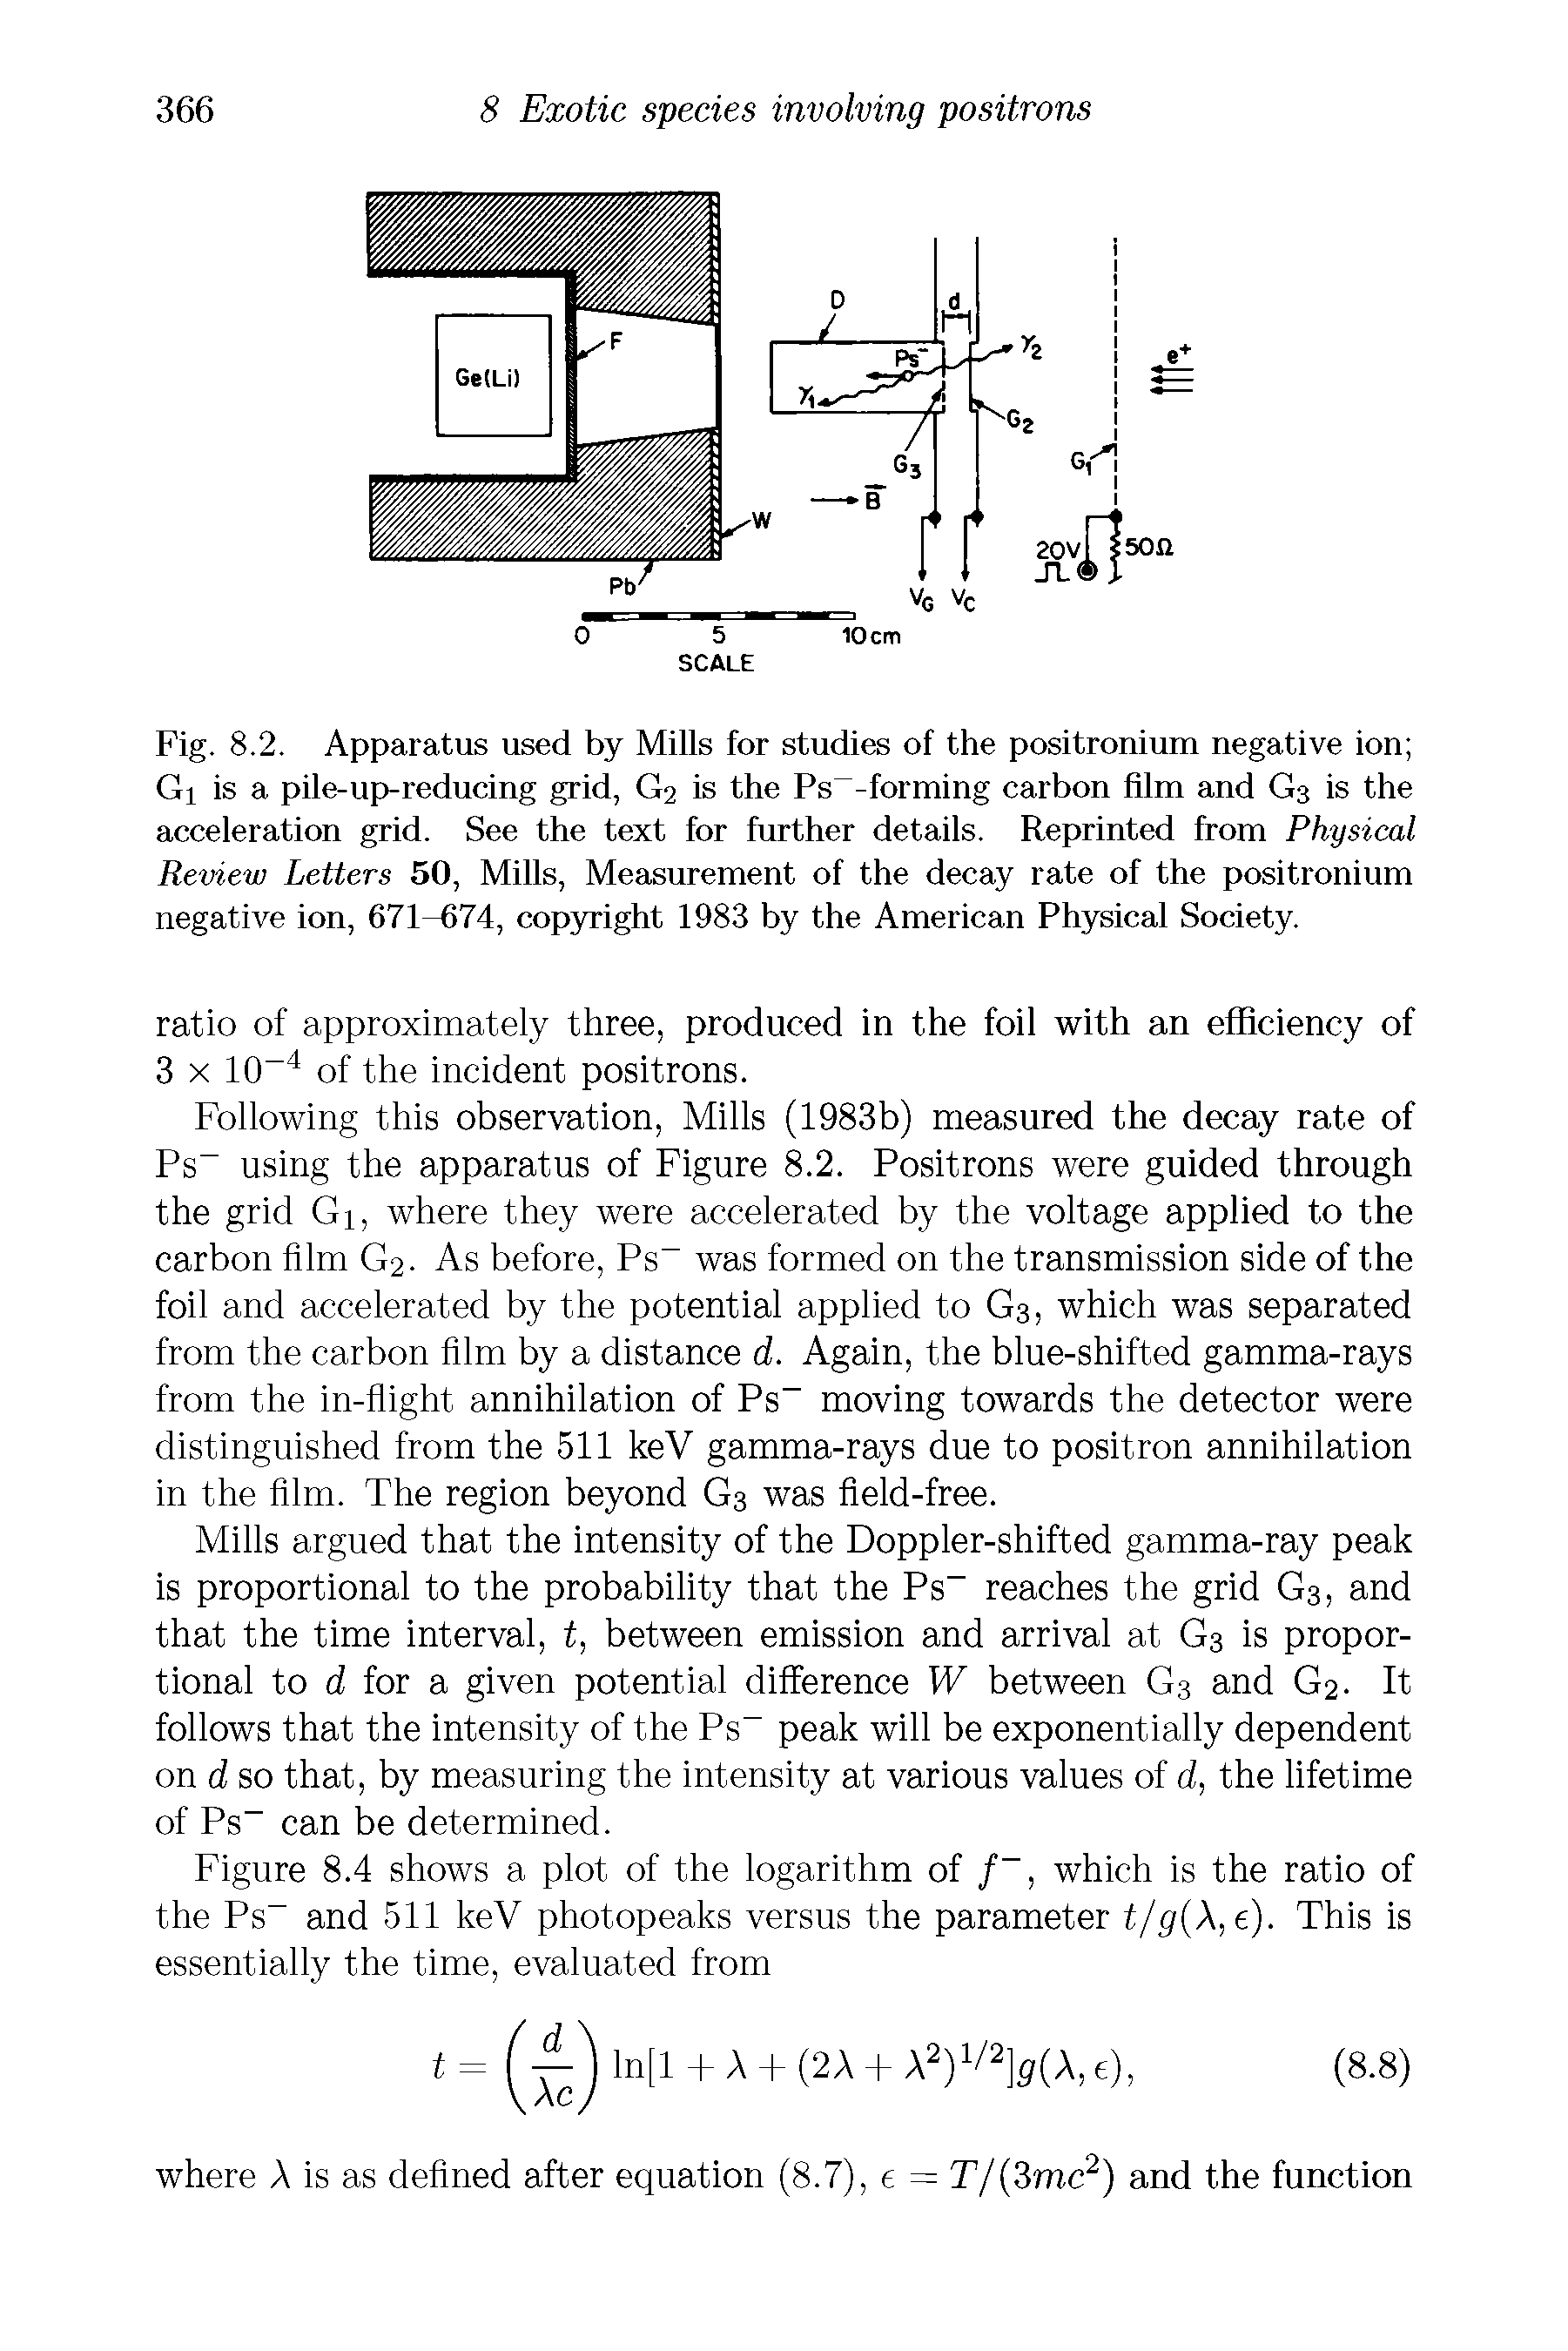 Fig. 8.2. Apparatus used by Mills for studies of the positronium negative ion Gi is a pile-up-reducing grid, G2 is the Ps -forming carbon film and G3 is the acceleration grid. See the text for further details. Reprinted from Physical Review Letters 50, Mills, Measurement of the decay rate of the positronium negative ion, 671-674, copyright 1983 by the American Physical Society.